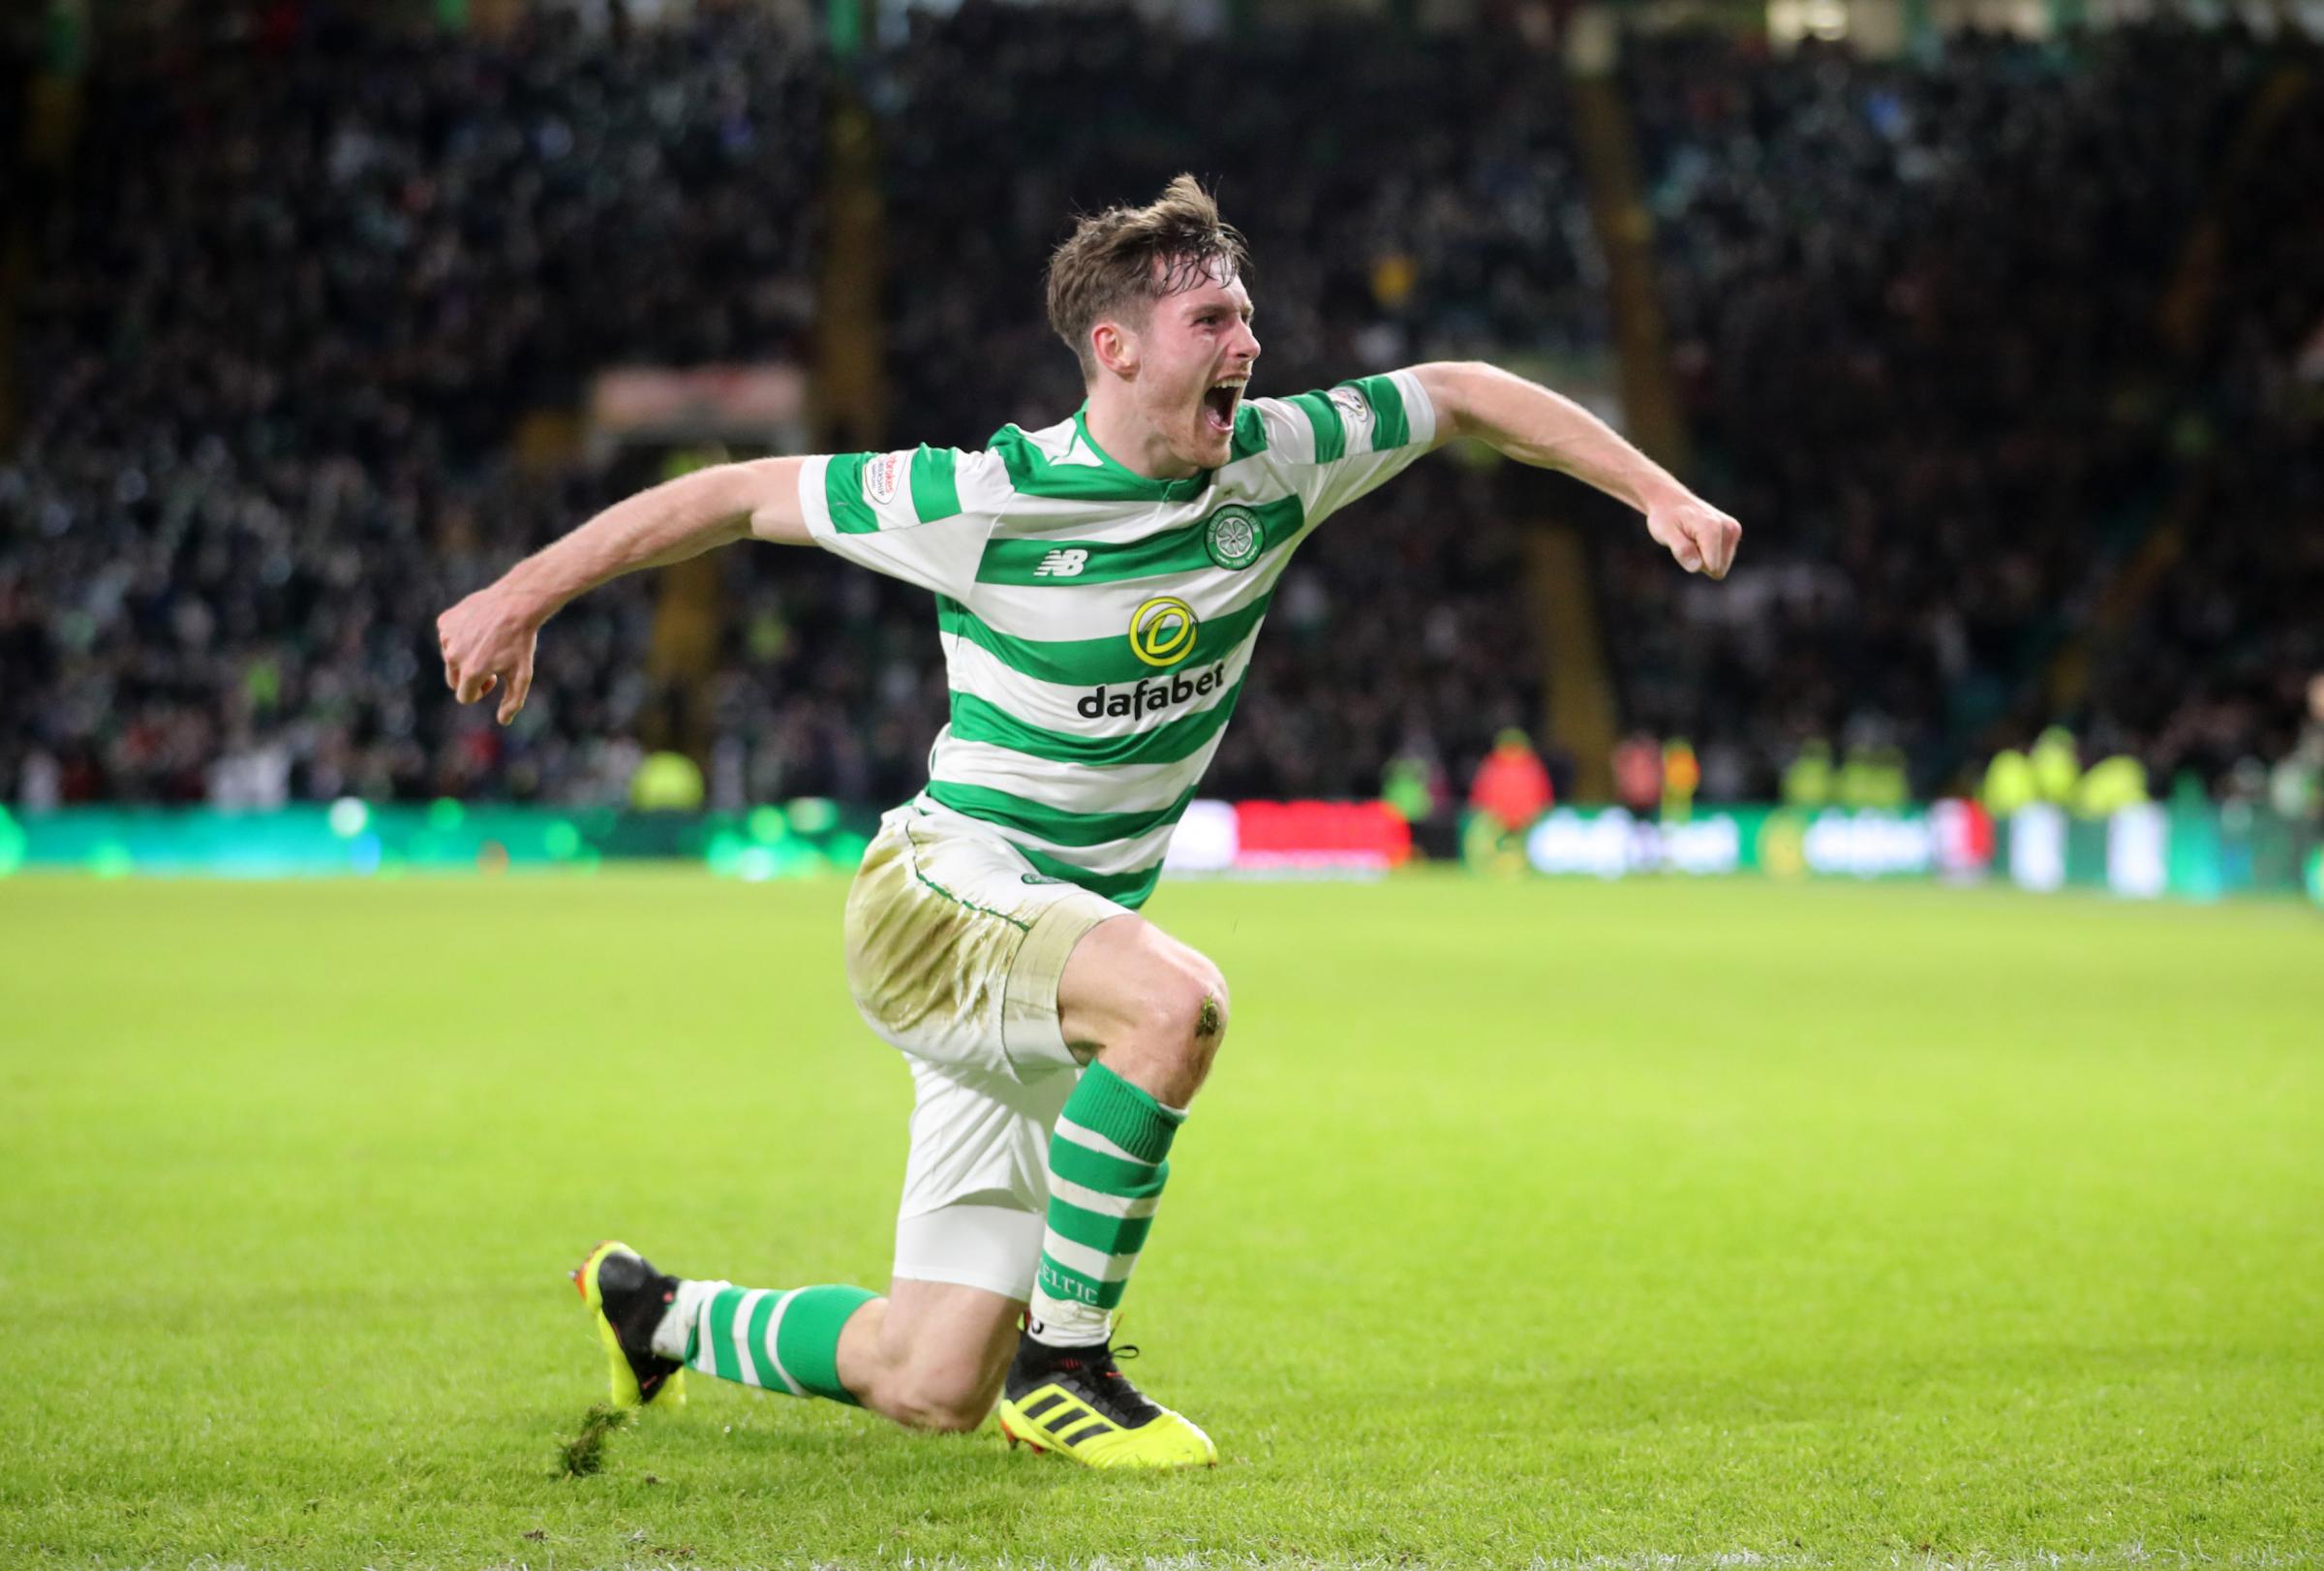 Celtic 3, Motherwell 0: Celtic return to the top of the league but injury to Odsonne Edouard will worry Brendan Rodgers